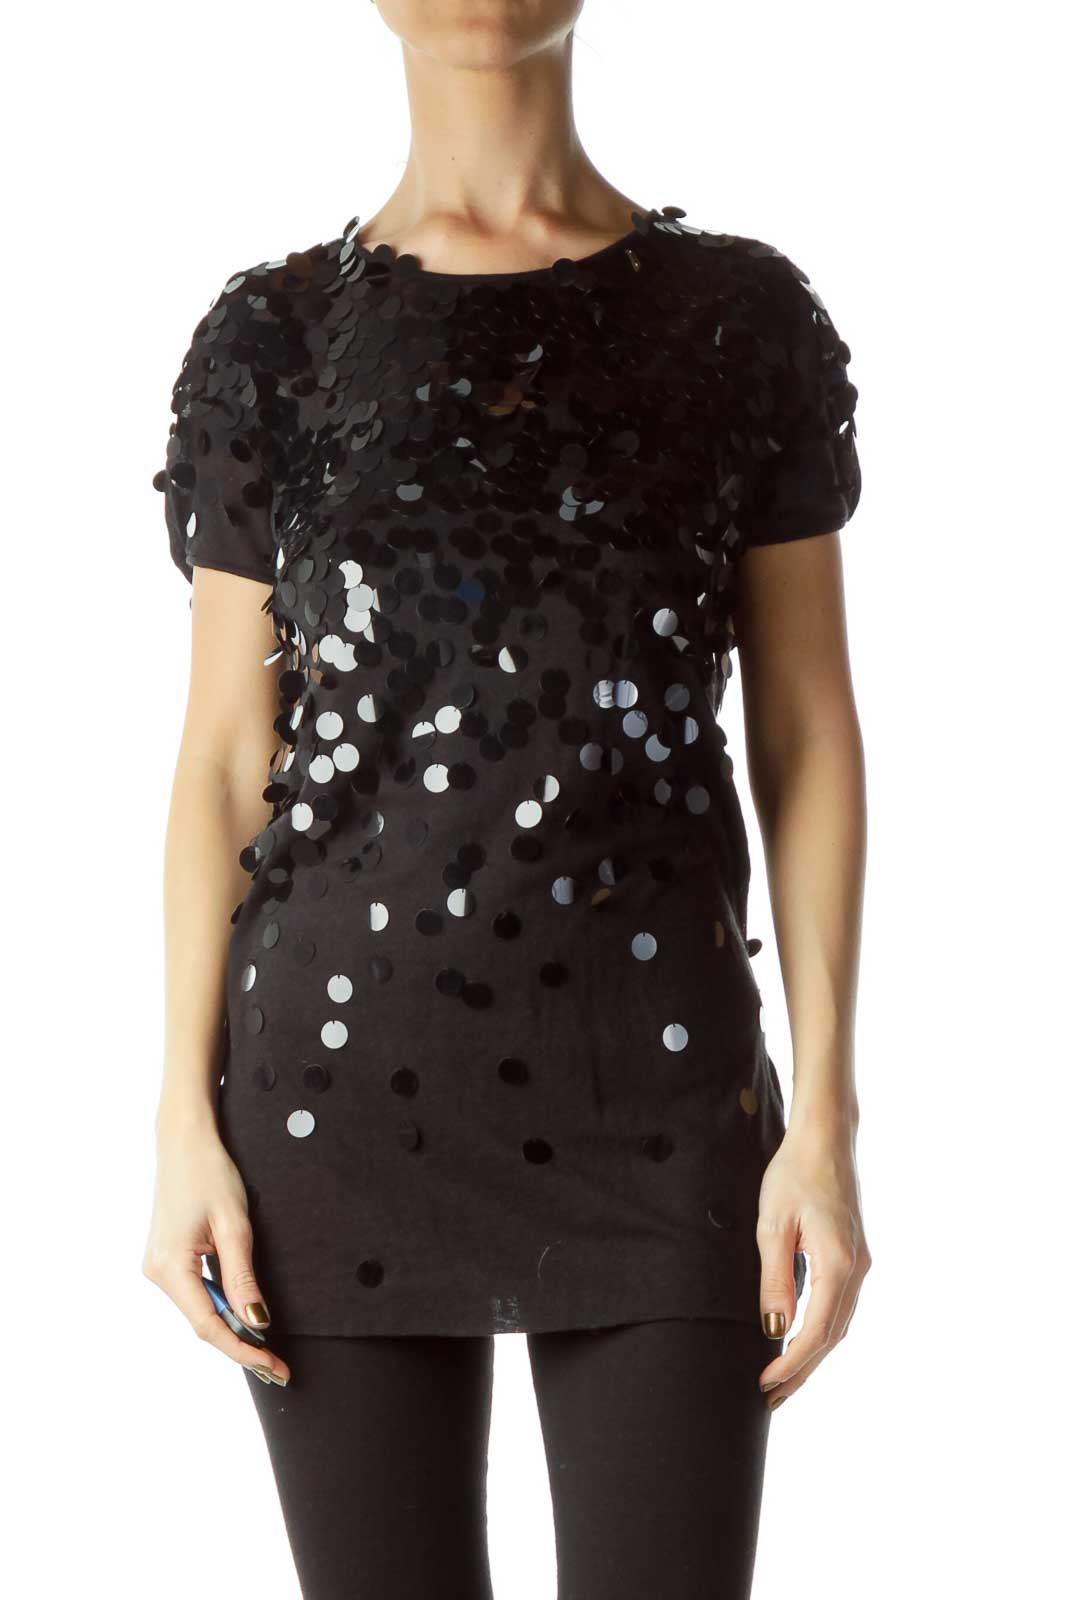 Black Sequined Loose Short-Sleeve Top Front